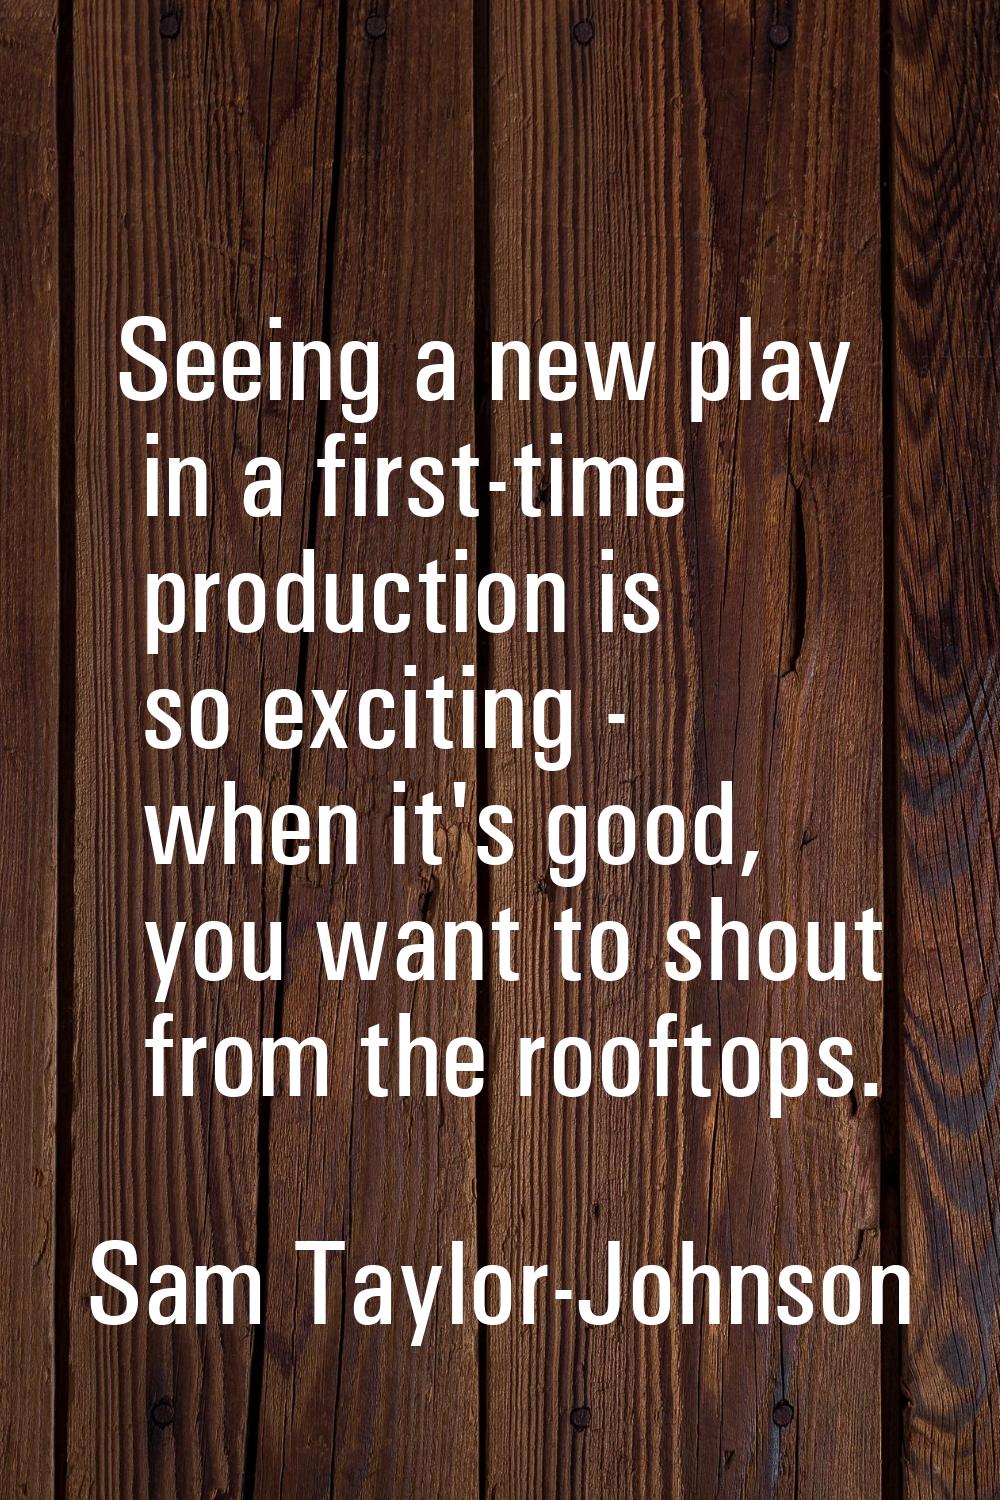 Seeing a new play in a first-time production is so exciting - when it's good, you want to shout fro